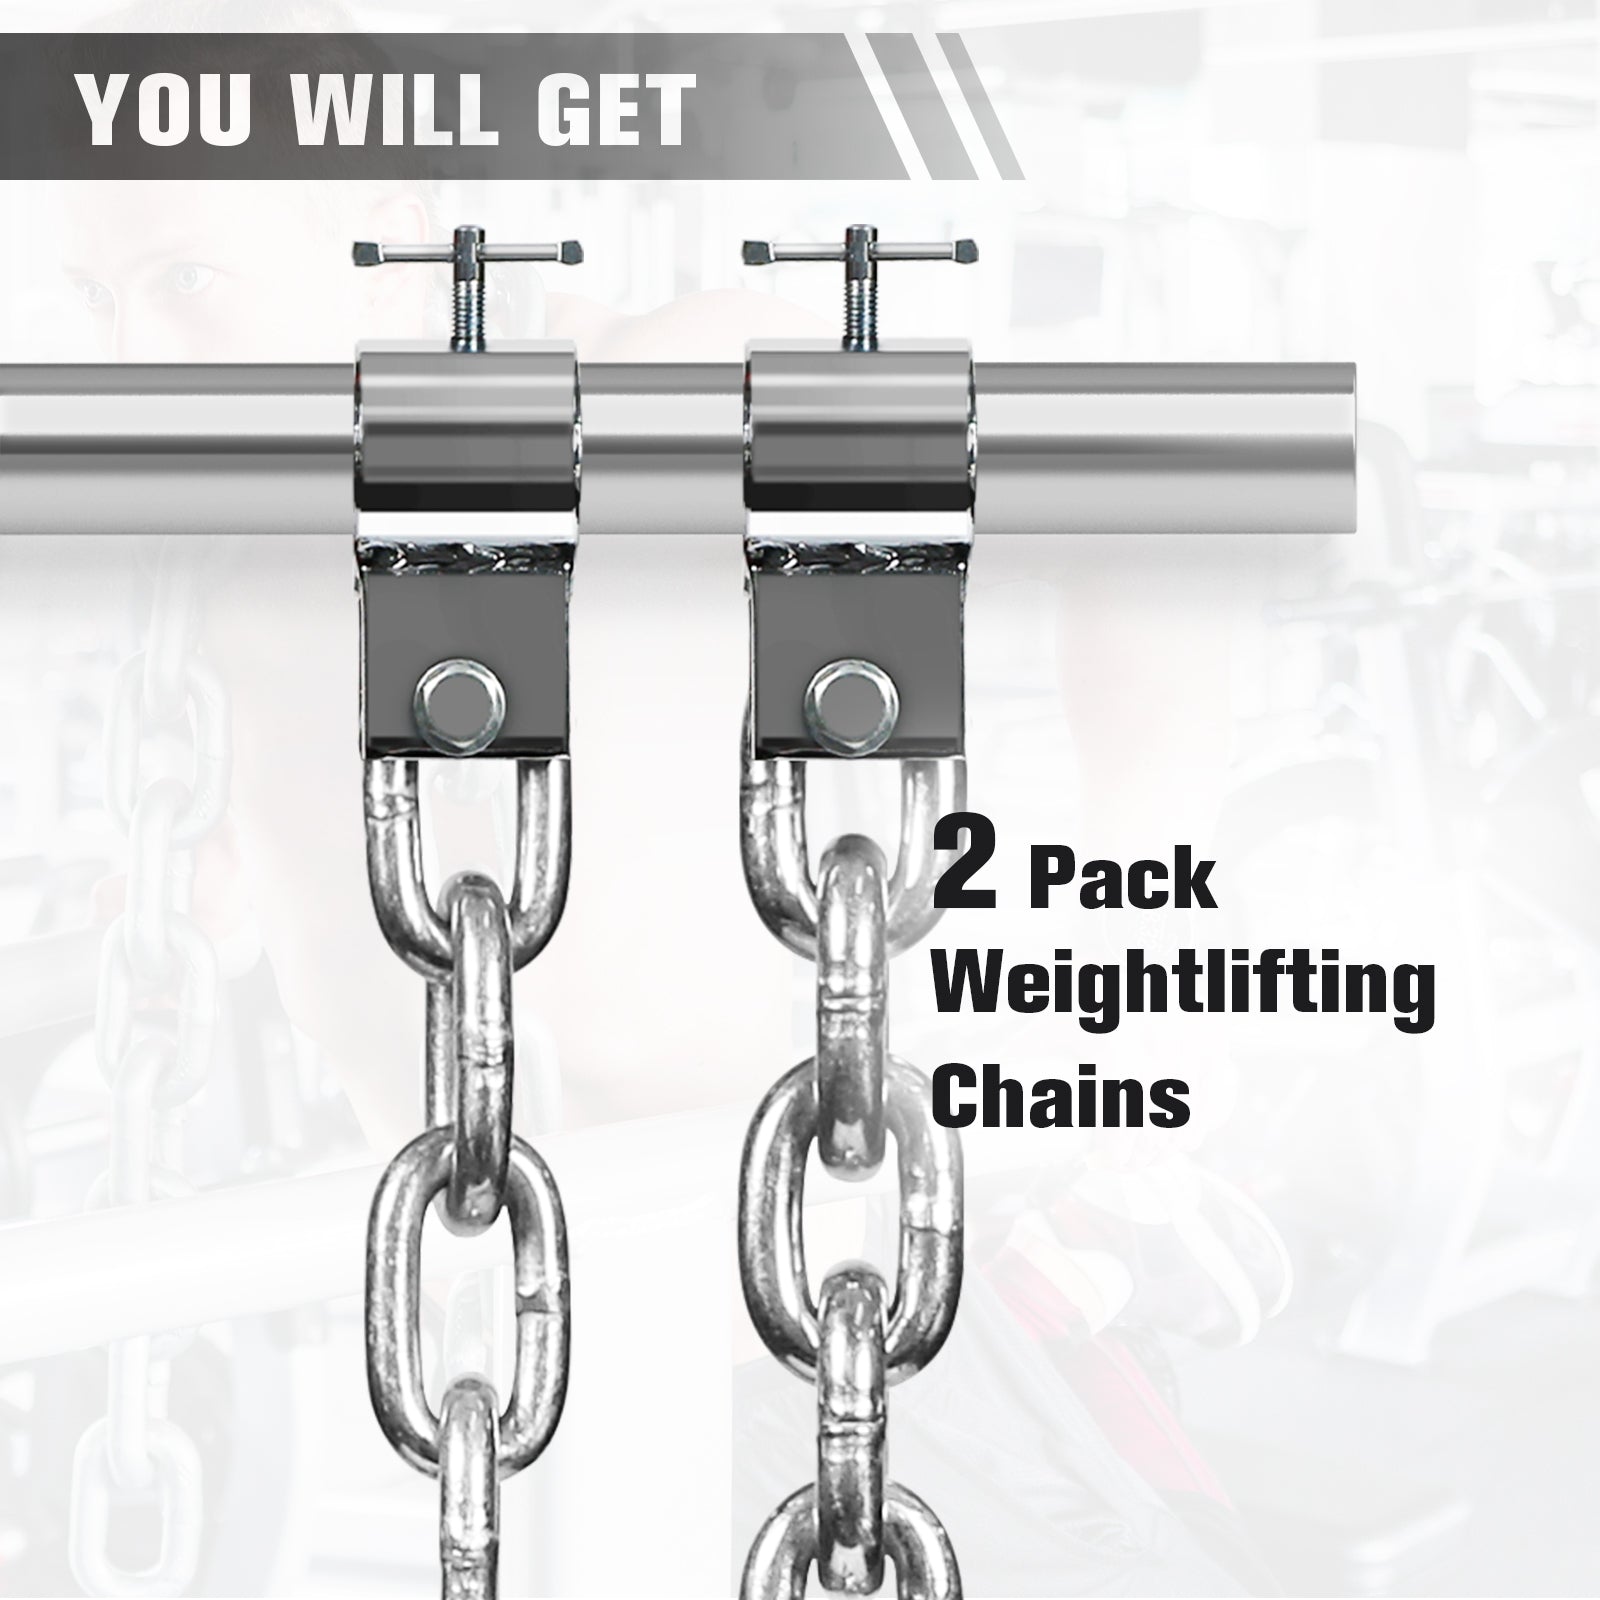 RitFit Weightlifting Chains for Sale Heavy Galvanized Iron for Barbell